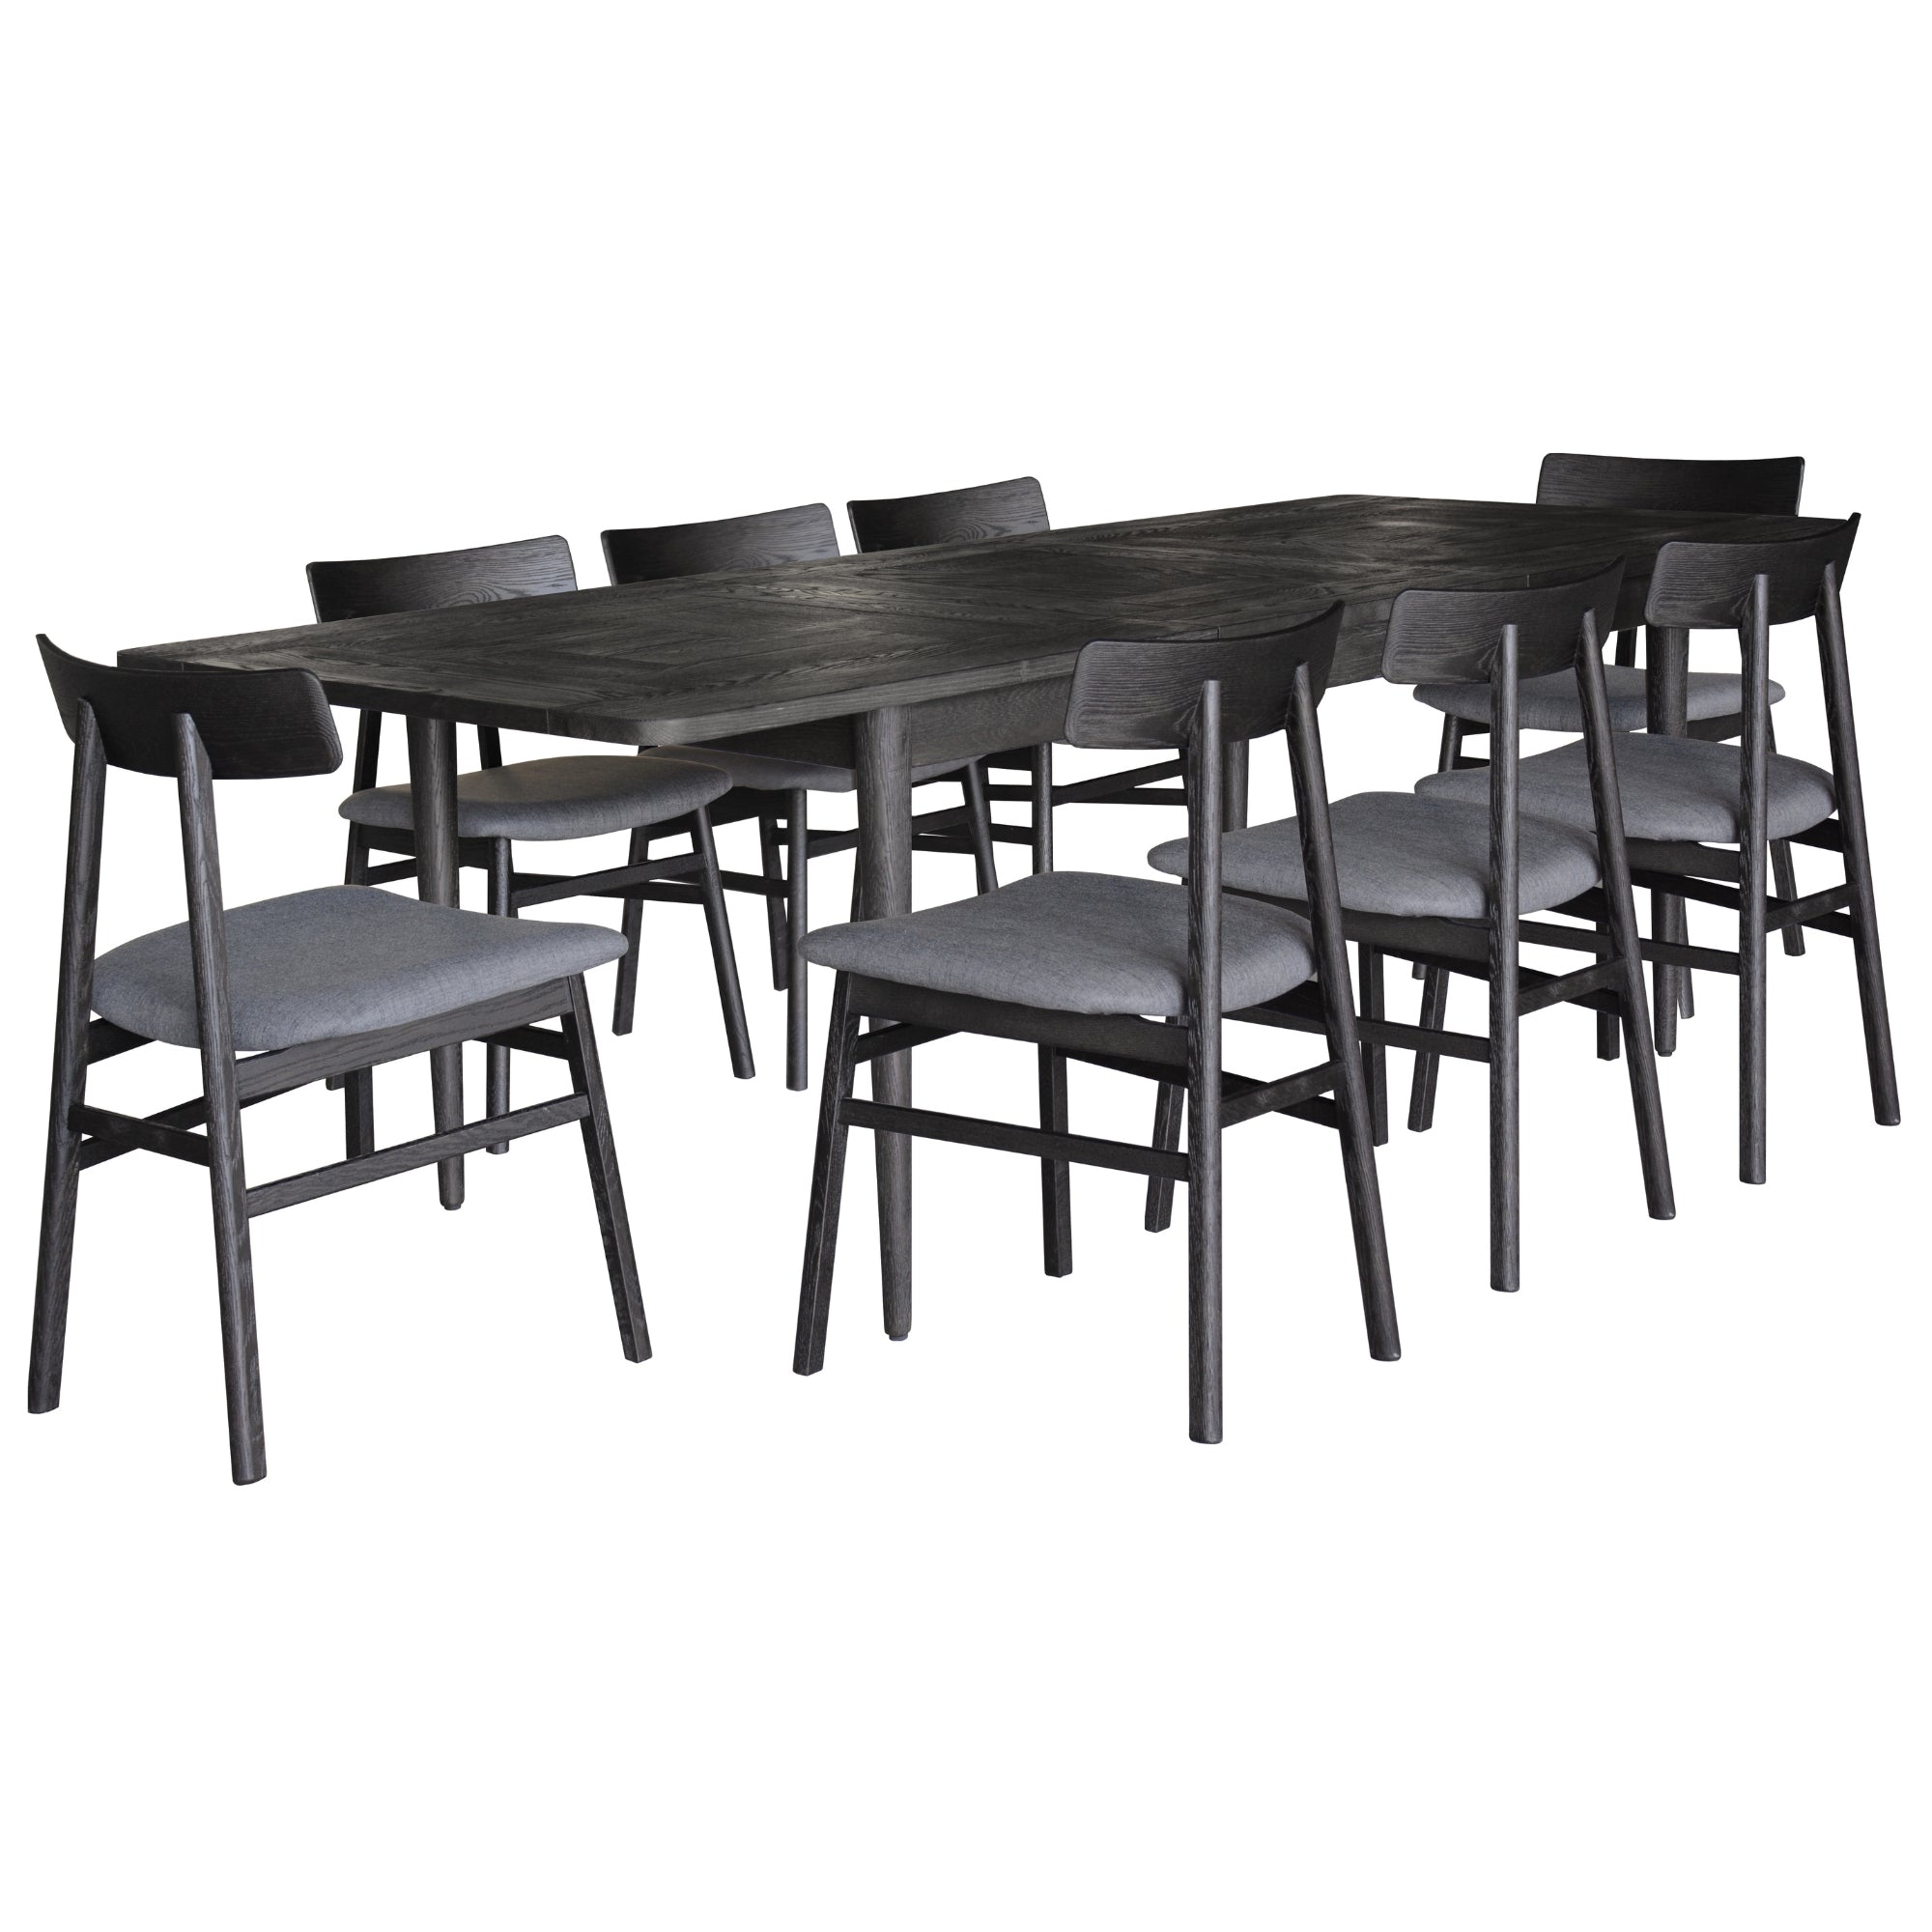 Extendable 9pc Dining Set, Solid Oak, Fabric Seat, Black